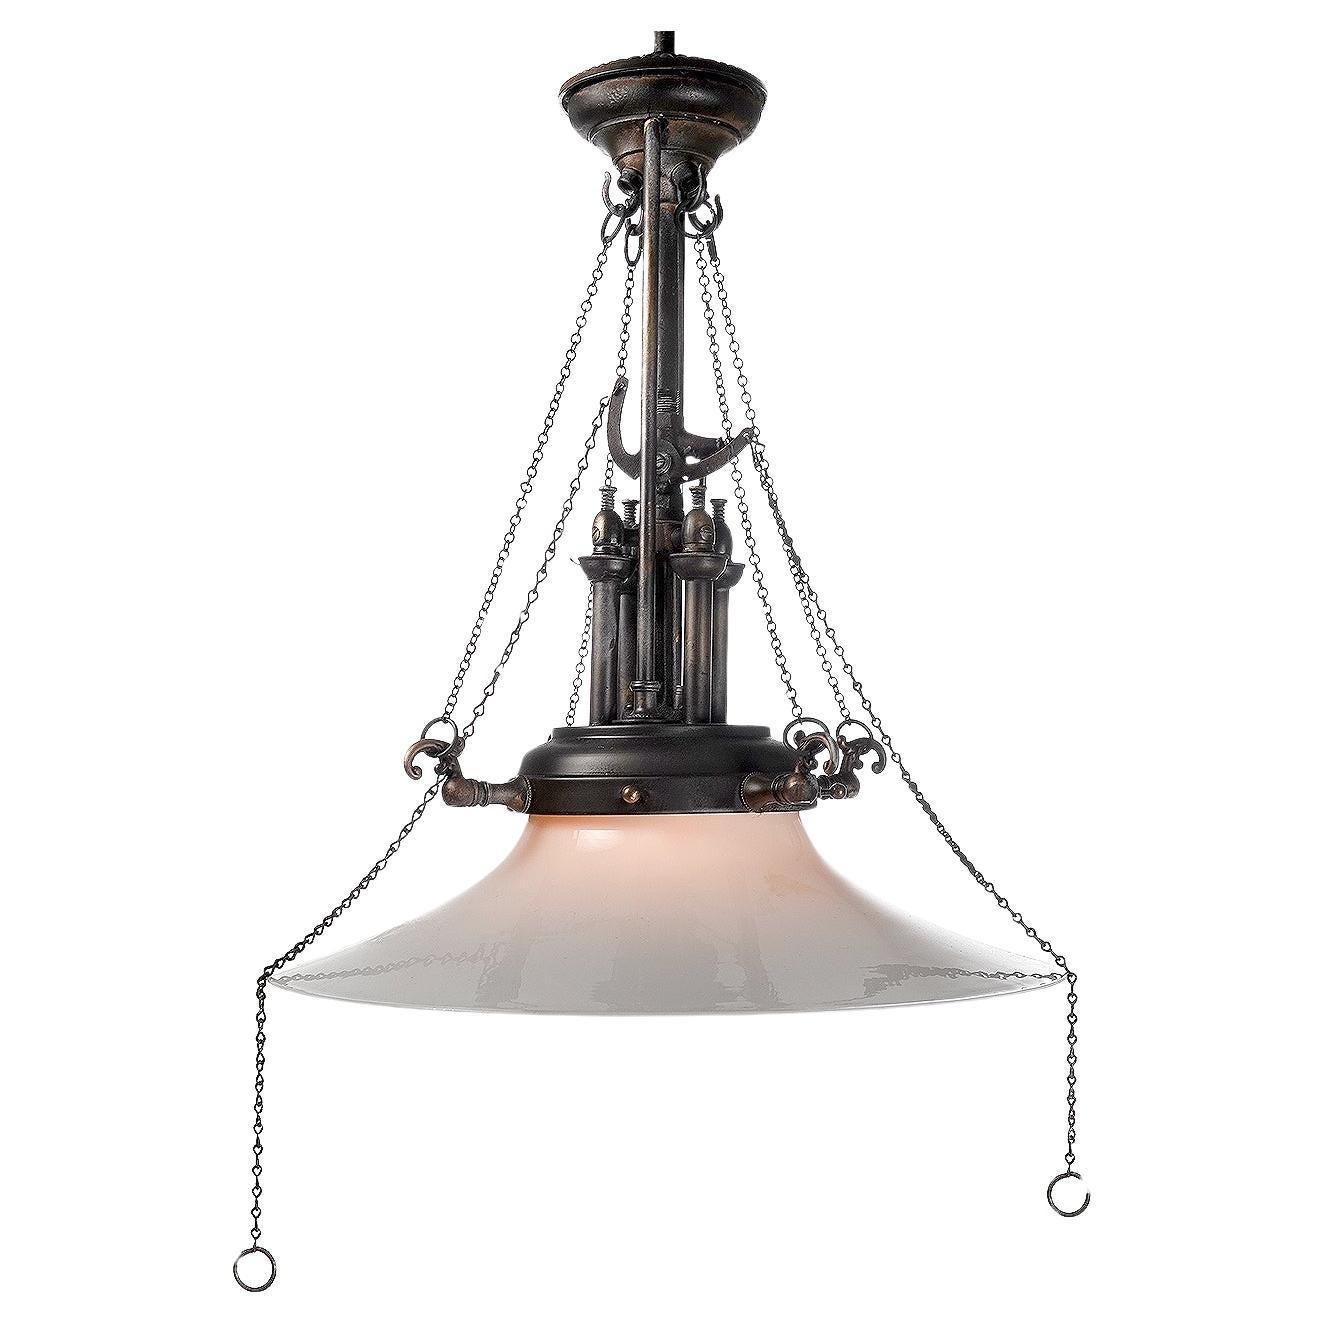 As you can imagine we see a good deal of lighting. This one I have not seen  and would use in my own home. This was a 4 burner gas lamp with all the valves and adjustments crowning a large and beautiful 18 inch diameter milk glass shade. We were